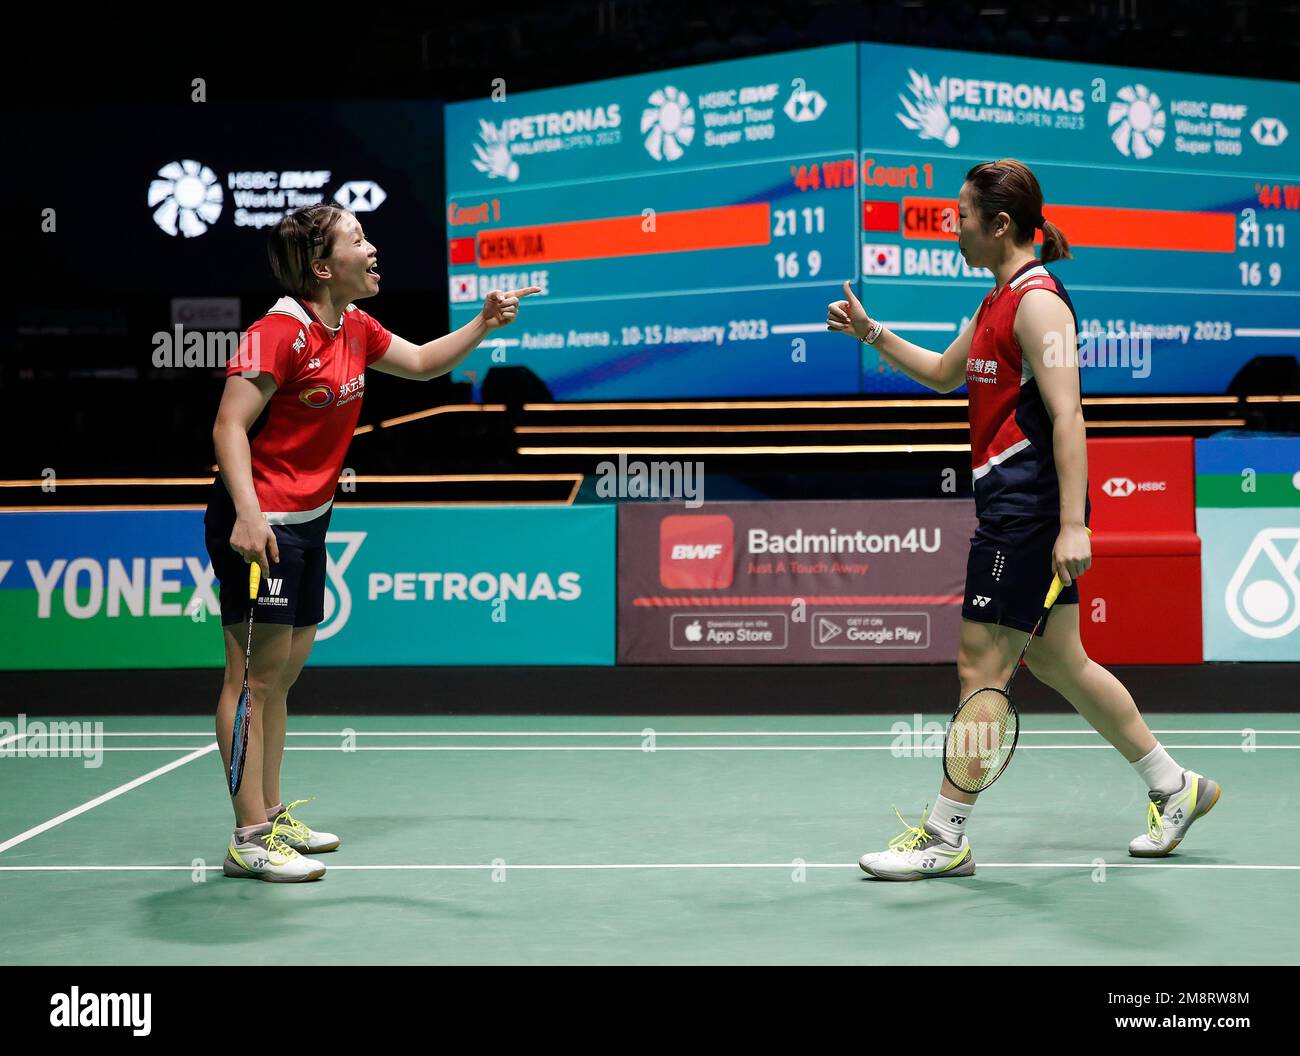 Kuala Lumpur, Malaysia. 15th Jan, 2023. Chen Qing Chen (L) and Jia Yi Fan of China react as they play against Baek Ha Na and Lee Yu Lim of Korea during the Women Doubles Finals match of the Petronas Malaysia Open 2023 at Axiata Arena.Chen Qing Chen and Jia Yi Fan of China won with scores; 21/21 : 16/10 (Photo by Wong Fok Loy/SOPA Images/Sipa USA) Credit: Sipa USA/Alamy Live News Stock Photo